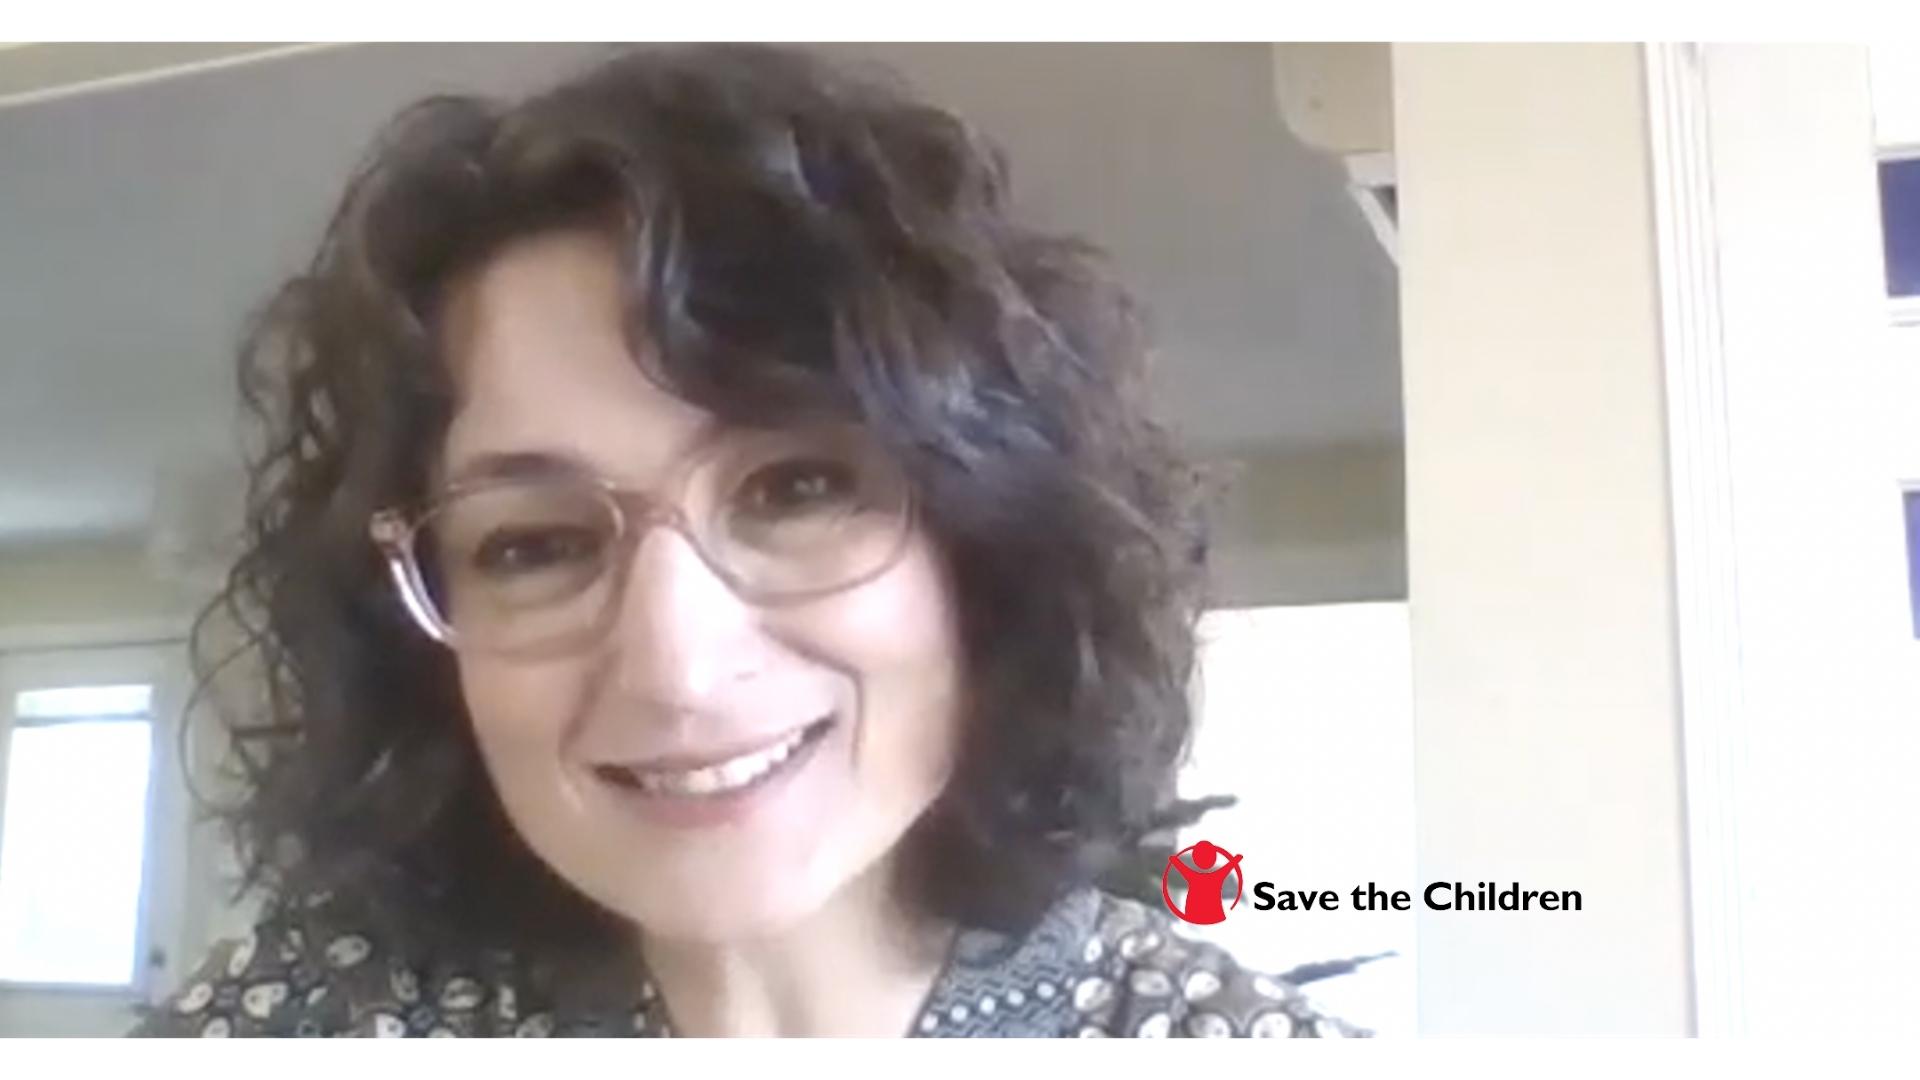 Interview: Tips for successful corporate partnerships for nonprofits – With Luciana Bonifacio from Save the Children